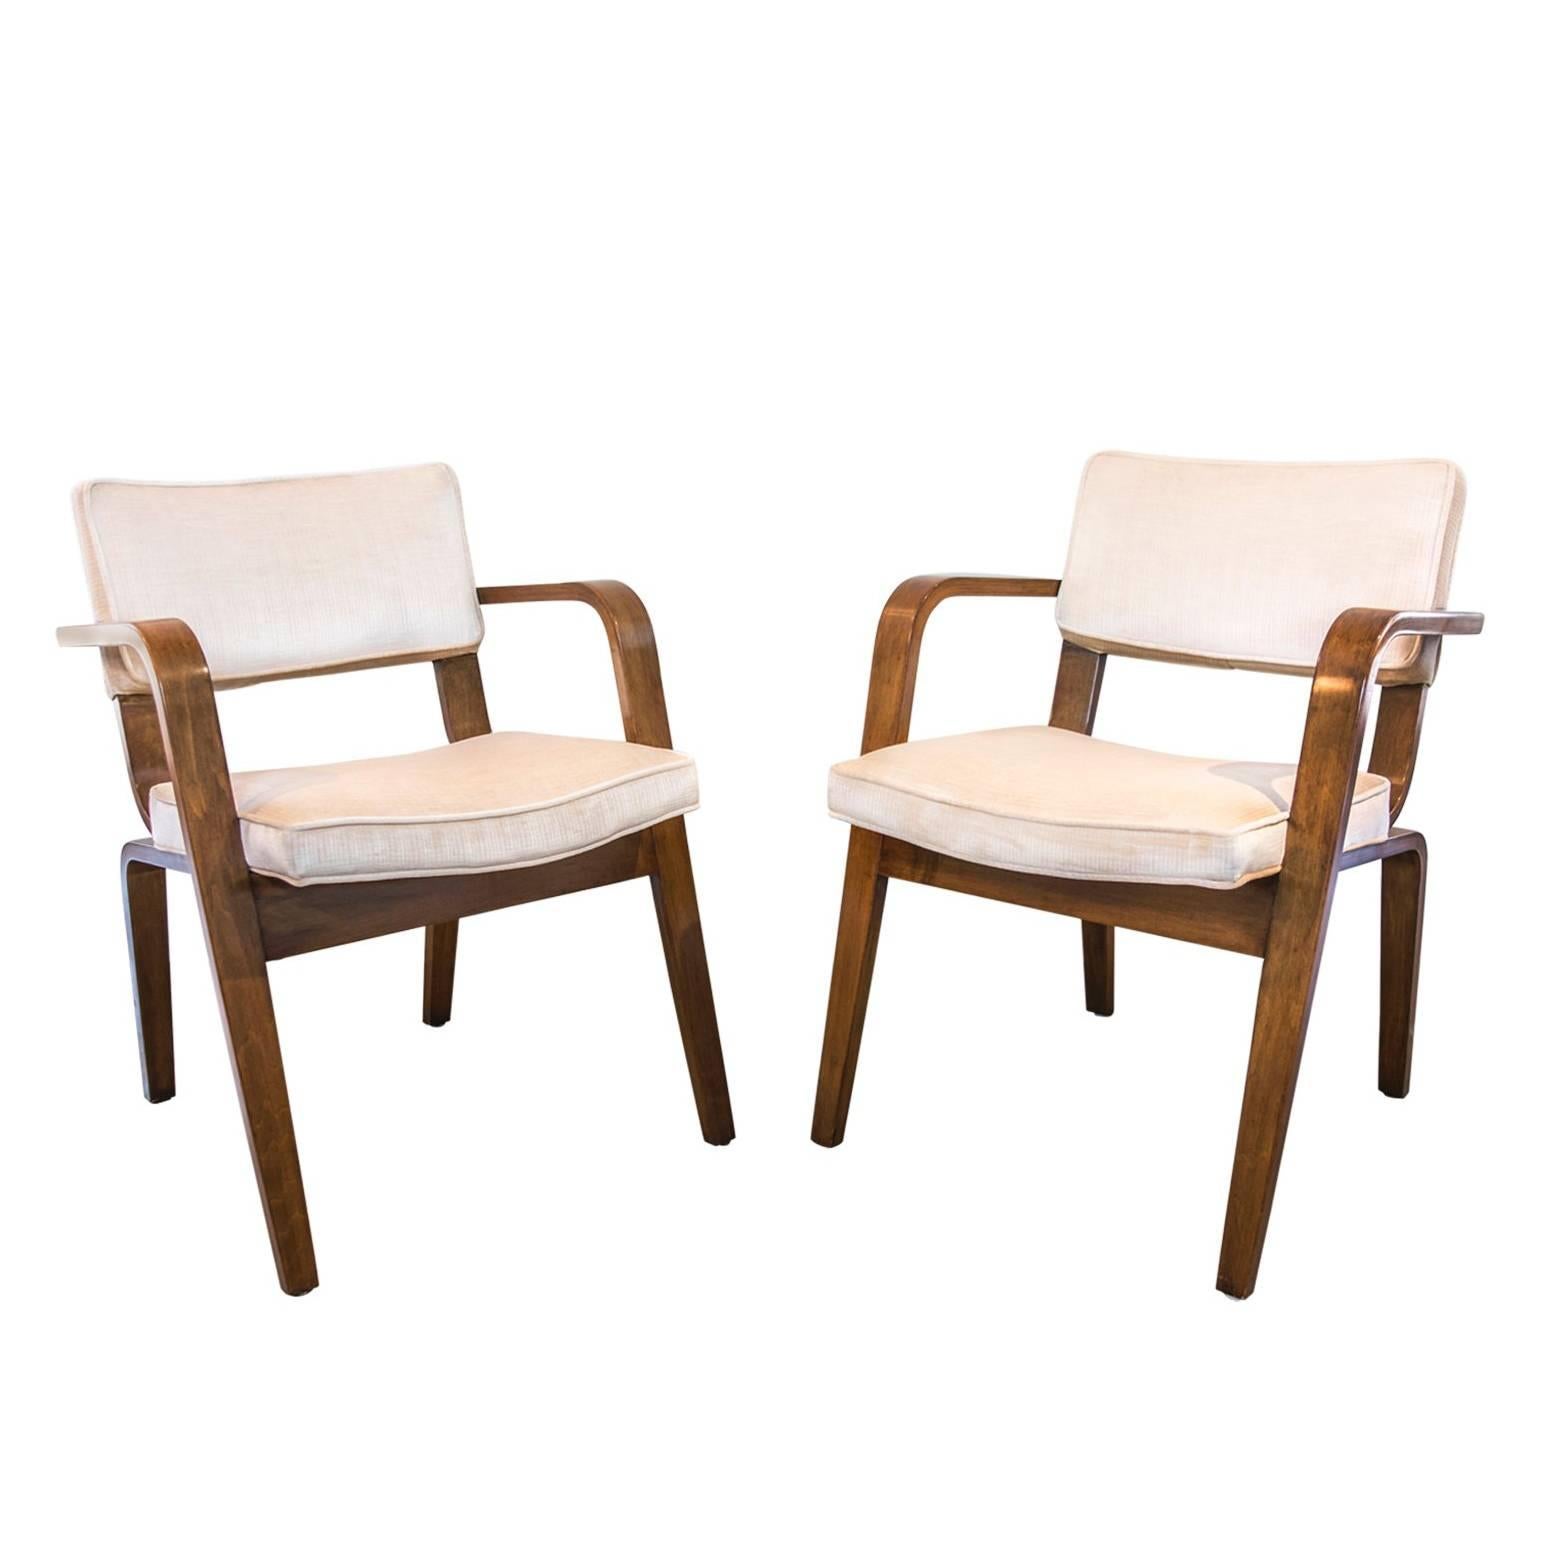 Pair of Thonet Bentwood and Upholstery Dining Chairs